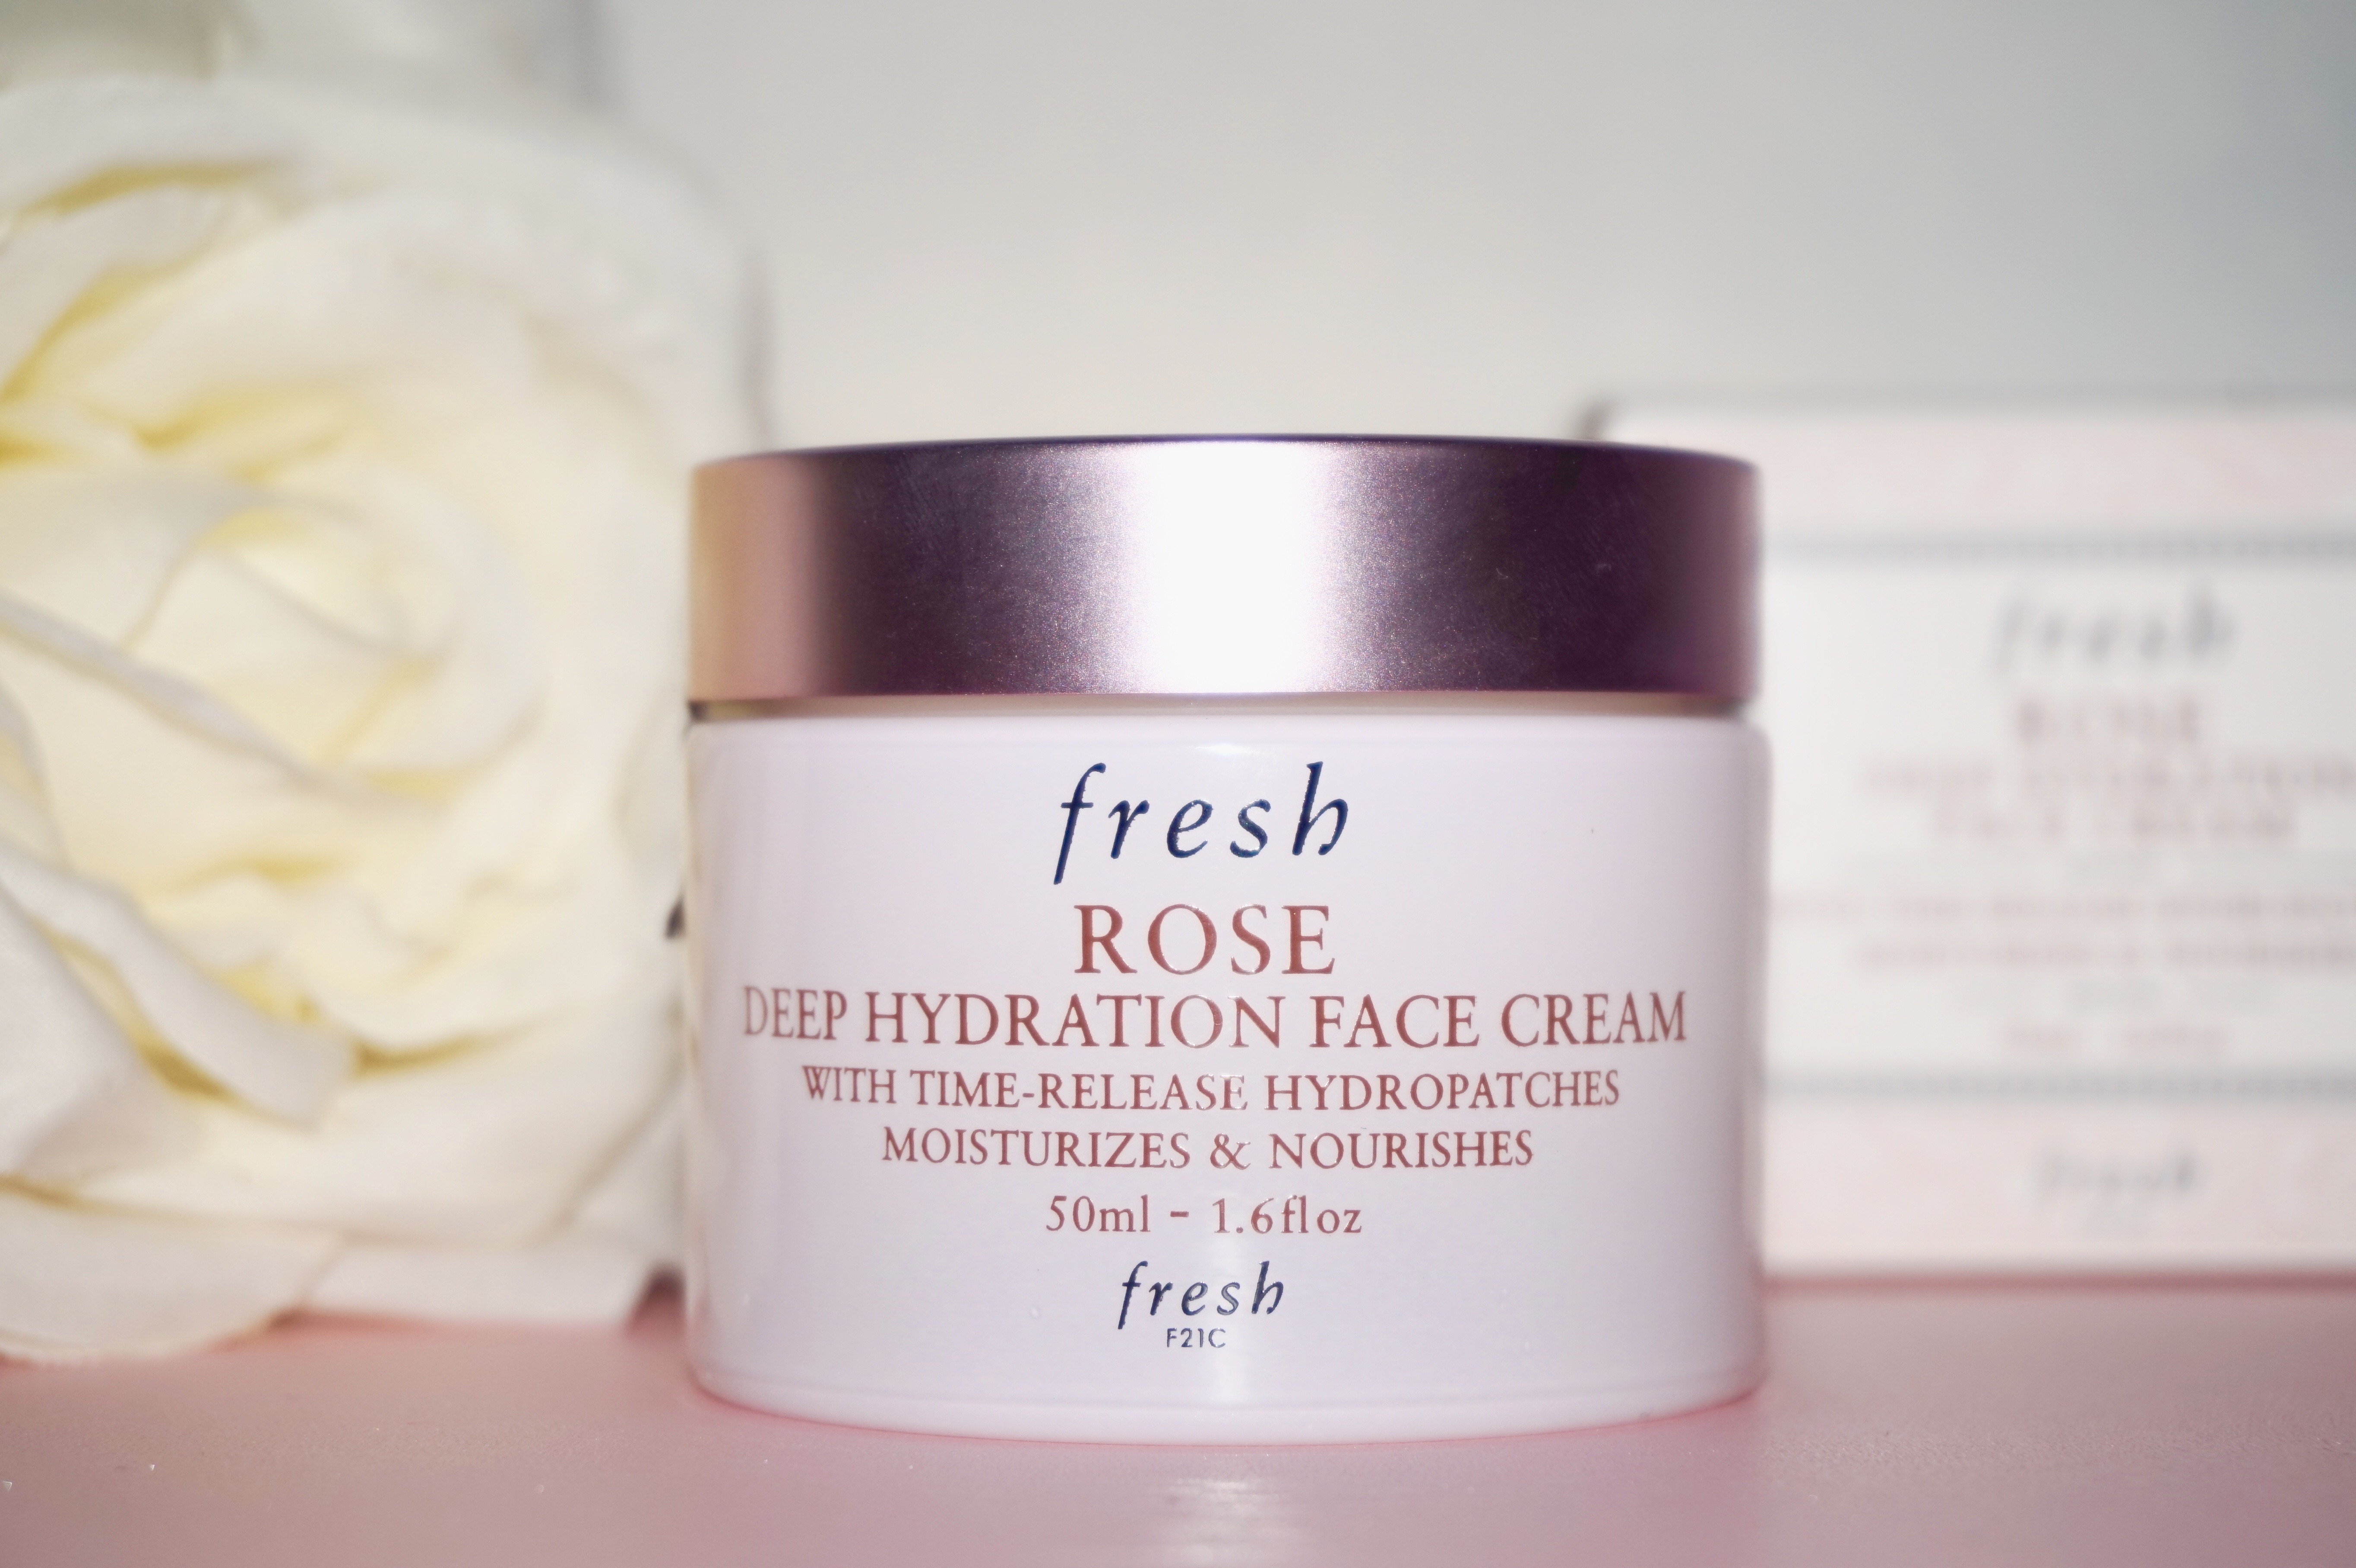 Fresh Rose Deep Hydration Face Cream | Review